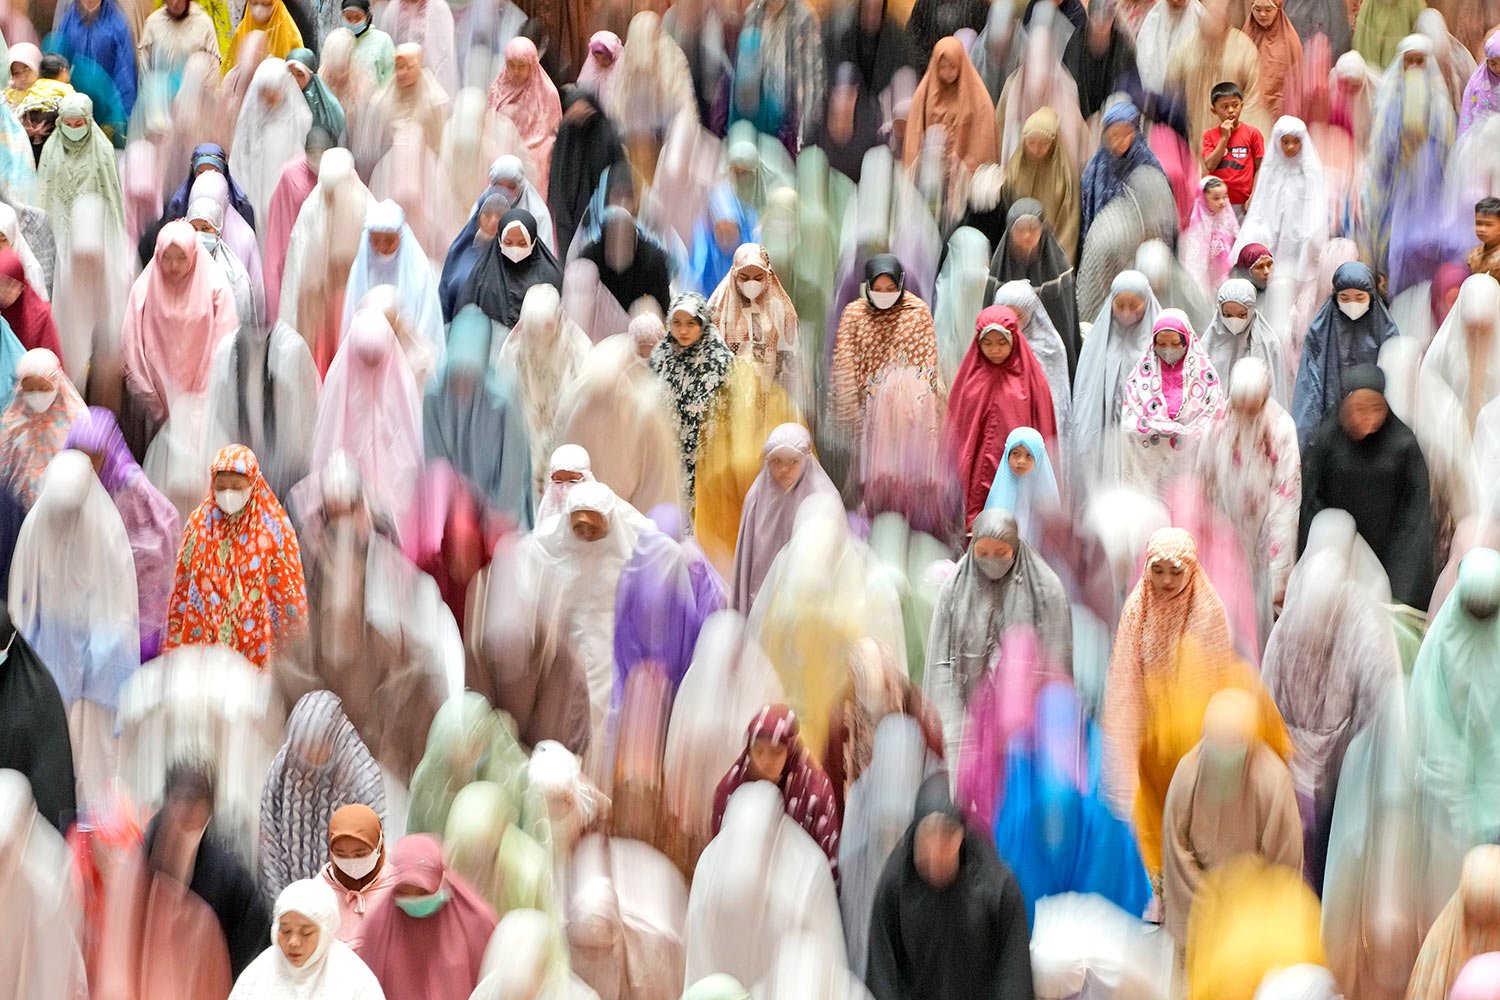  Muslim women perform an evening prayer called 'tarawih' that marks the first eve of the holy fasting month of Ramadan at Istiqlal Mosque in Jakarta, Indonesia, Saturday, April 2, 2022. (AP Photo/Dita Alangkara) 